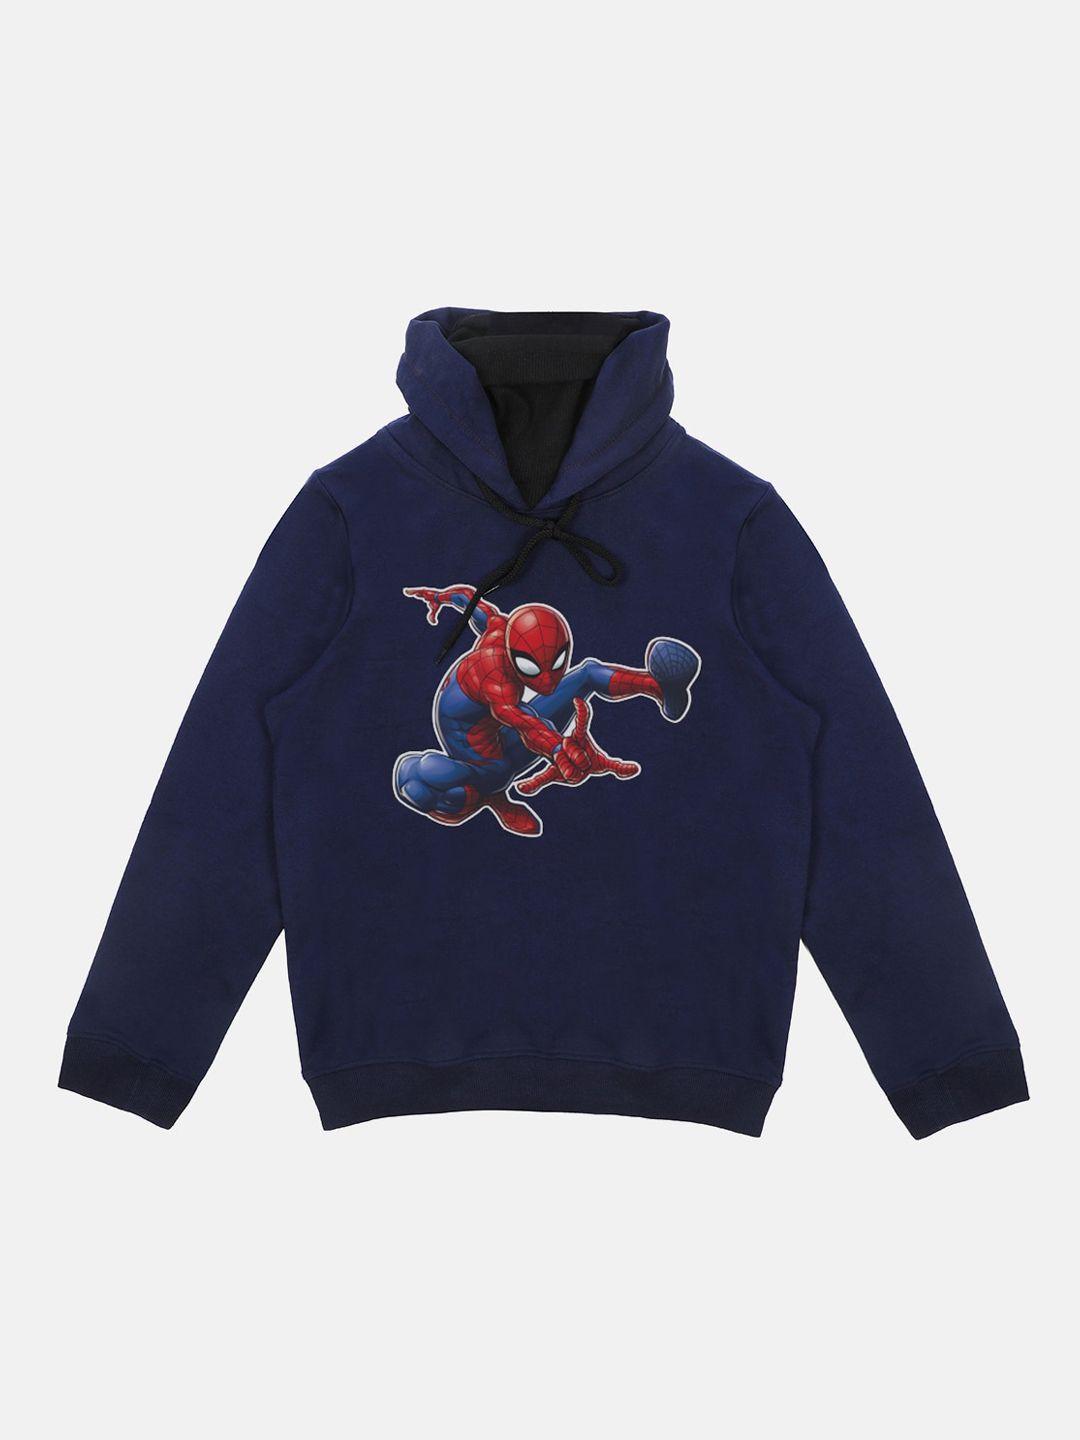 marvel by wear your mind boys blue red printed hooded sweatshirt with attached face cover